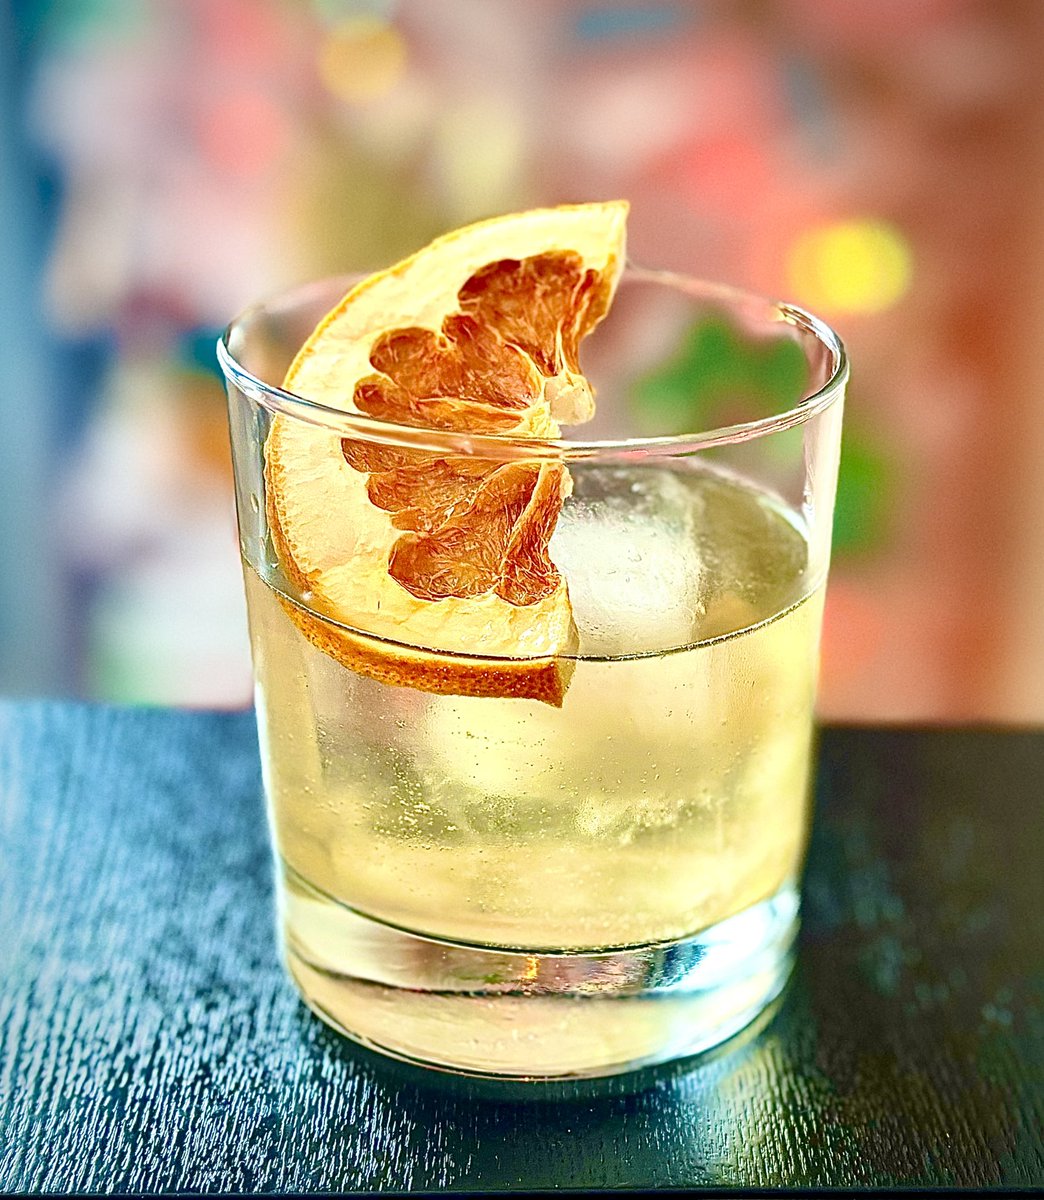 Happy #ThirstyThursday 🥵

This is one of my favorite old fashioned variants…the Oaxaca old fashioned 🥃

Instead of bourbon it has tequila and mezcal 🔥

Cheers!